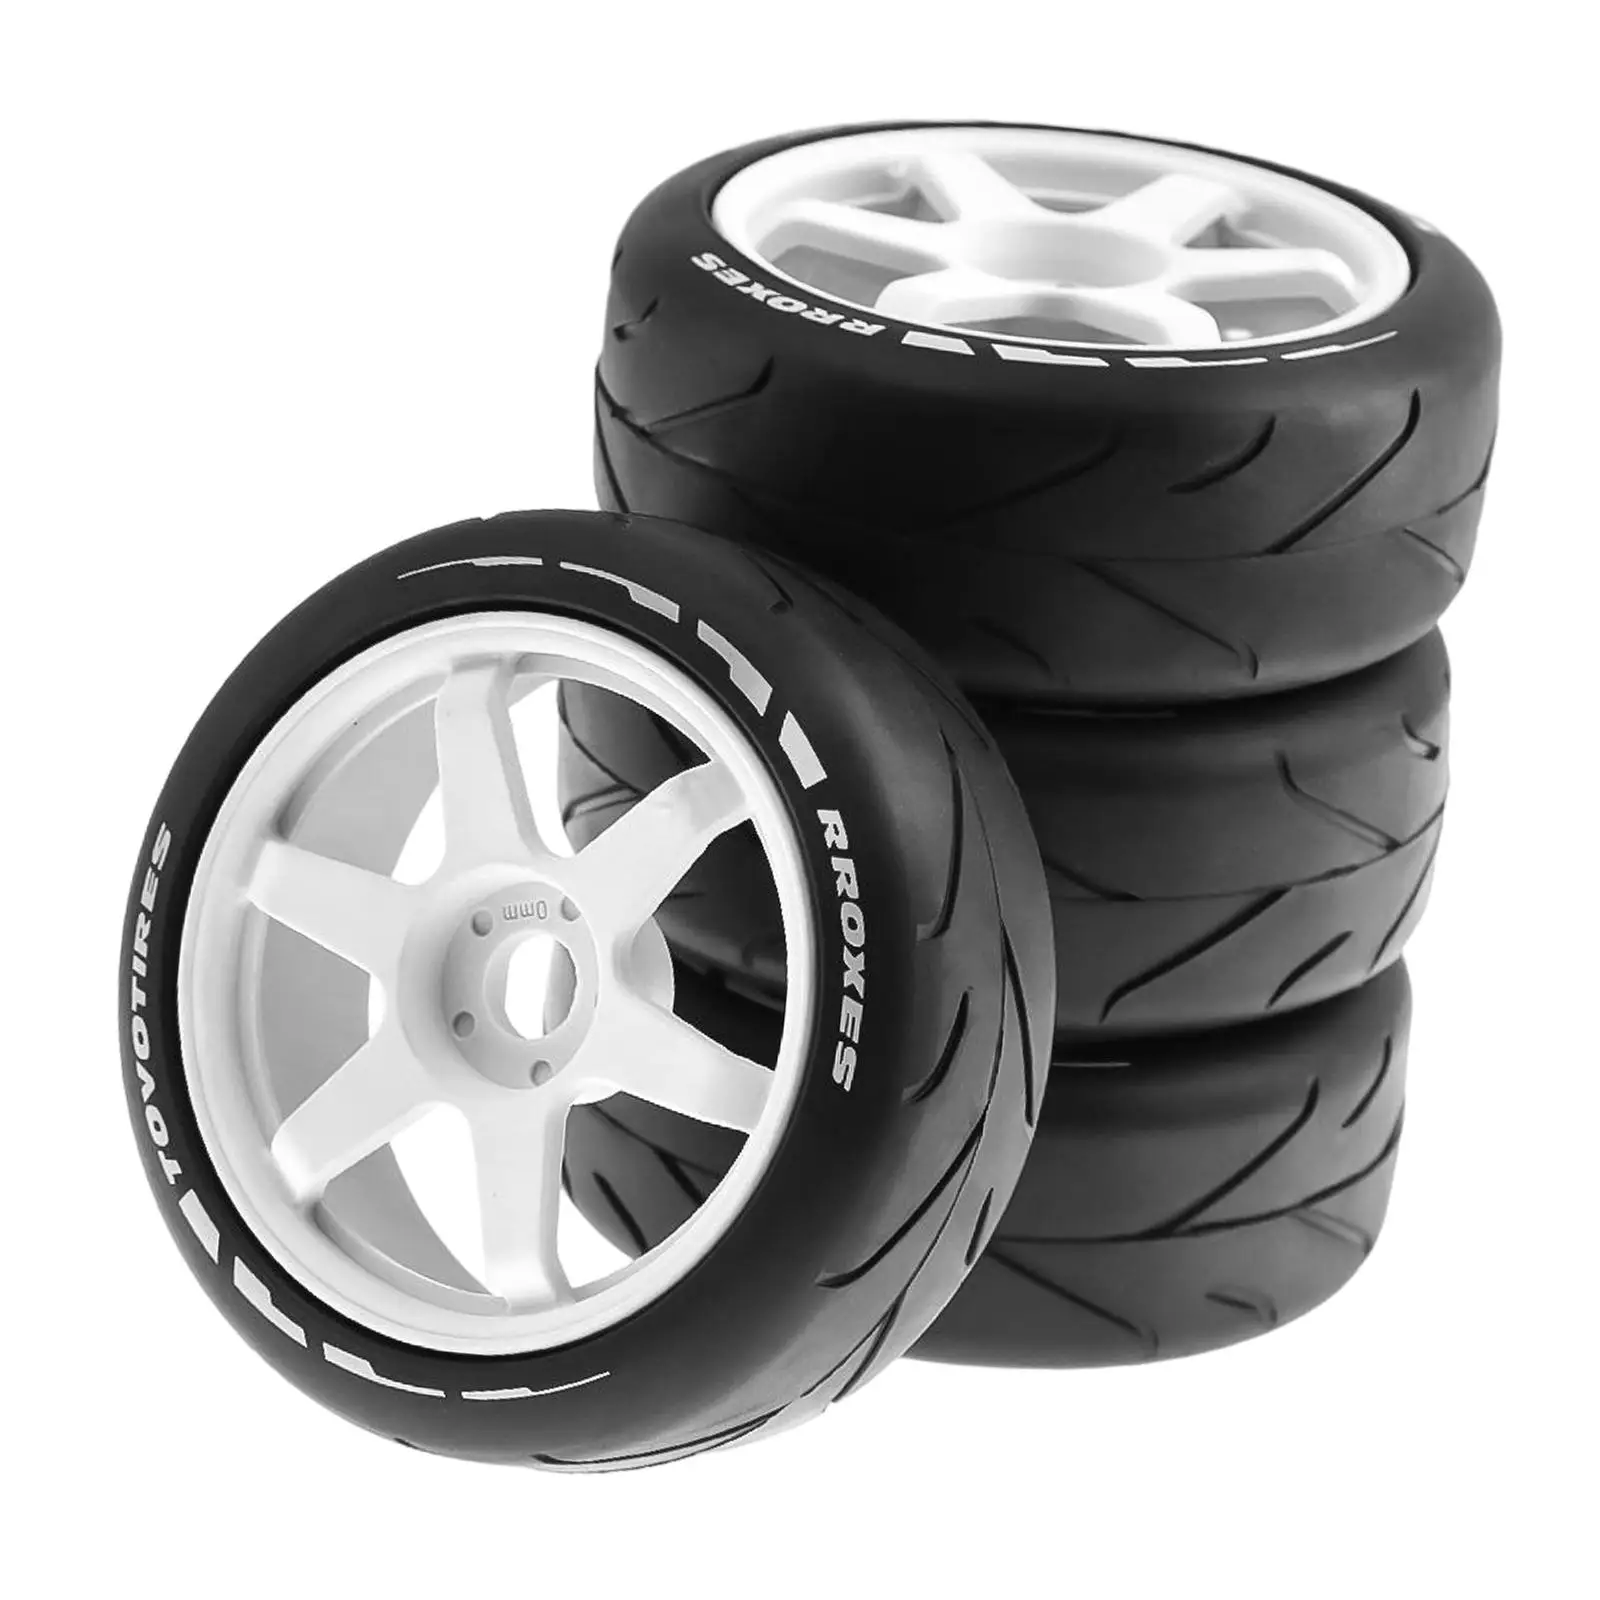 4 Pieces Rubber Wheel Rim and Tires Replacements for 1:8 Scale Trucks Crawler RC Car DIY Accessory